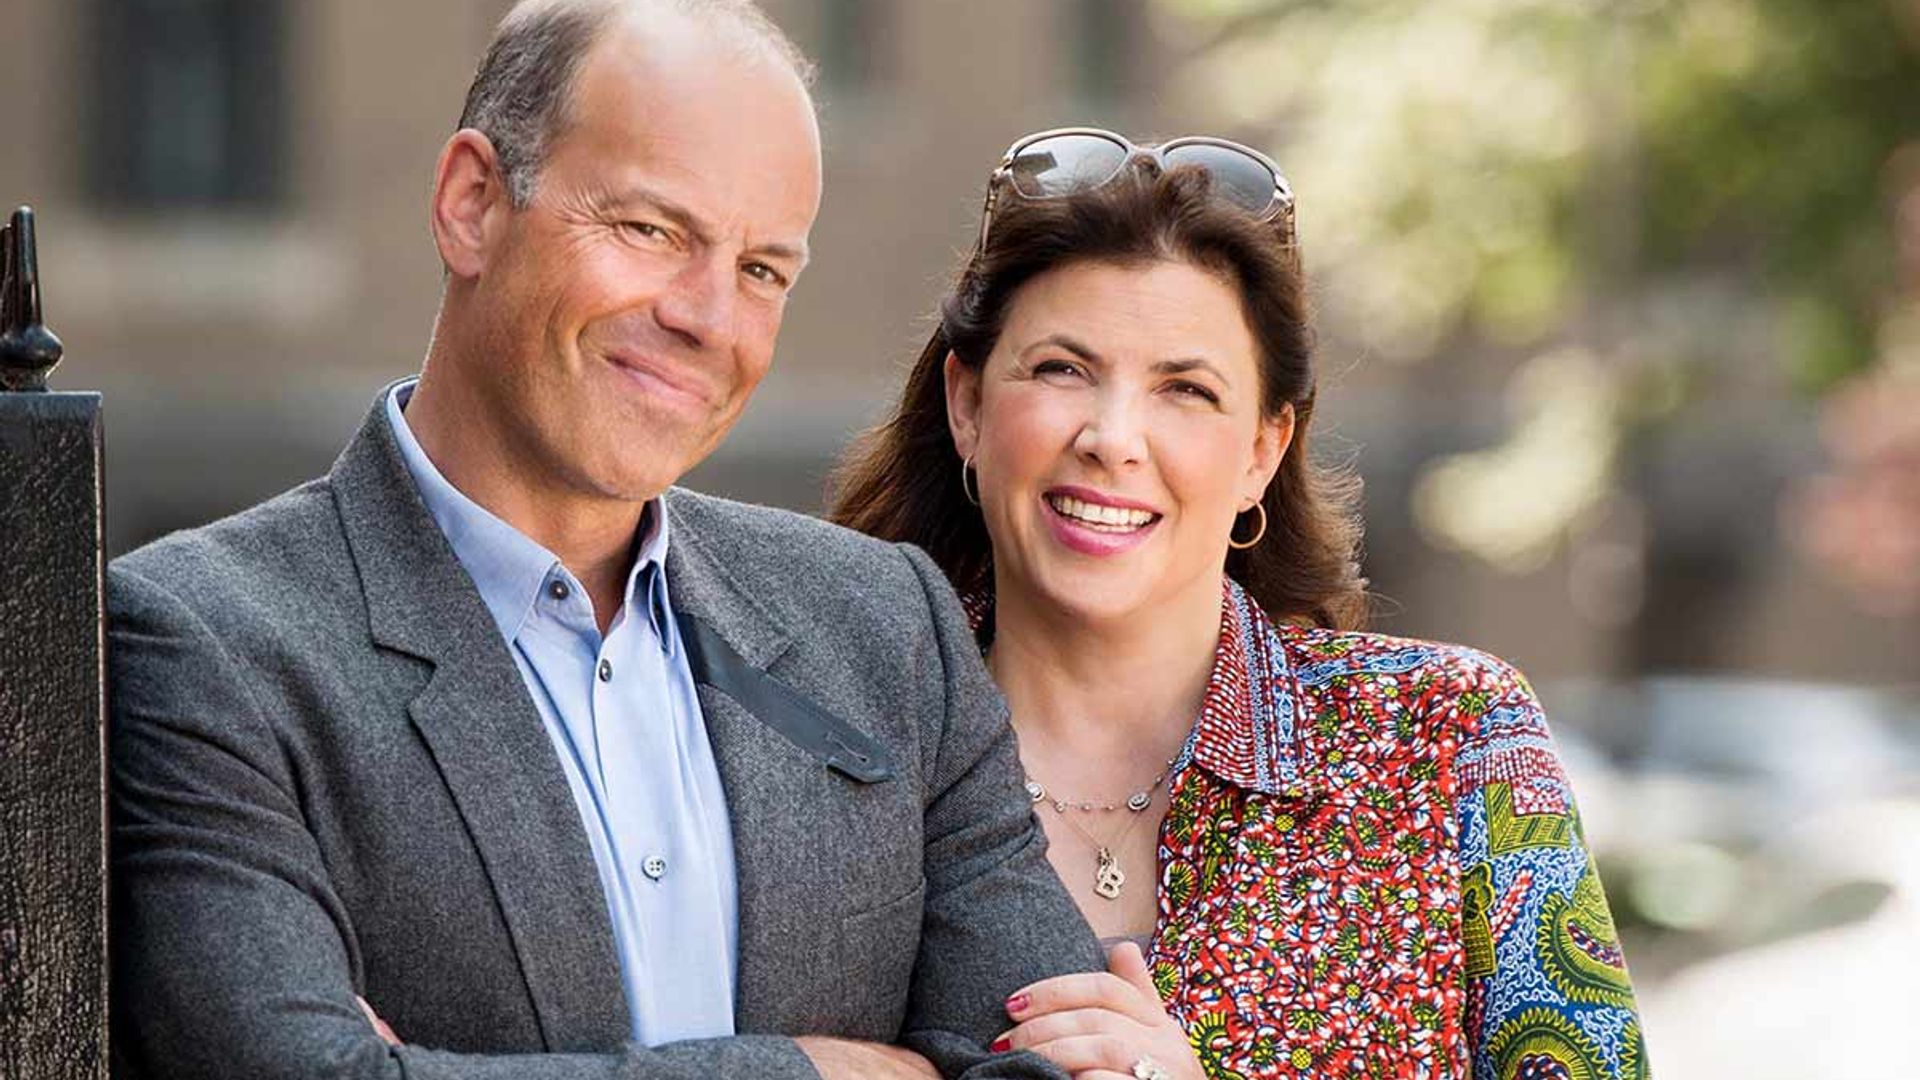 Phil Spencer and Kirstie Allsopp’s 6 top tips to add value to your home